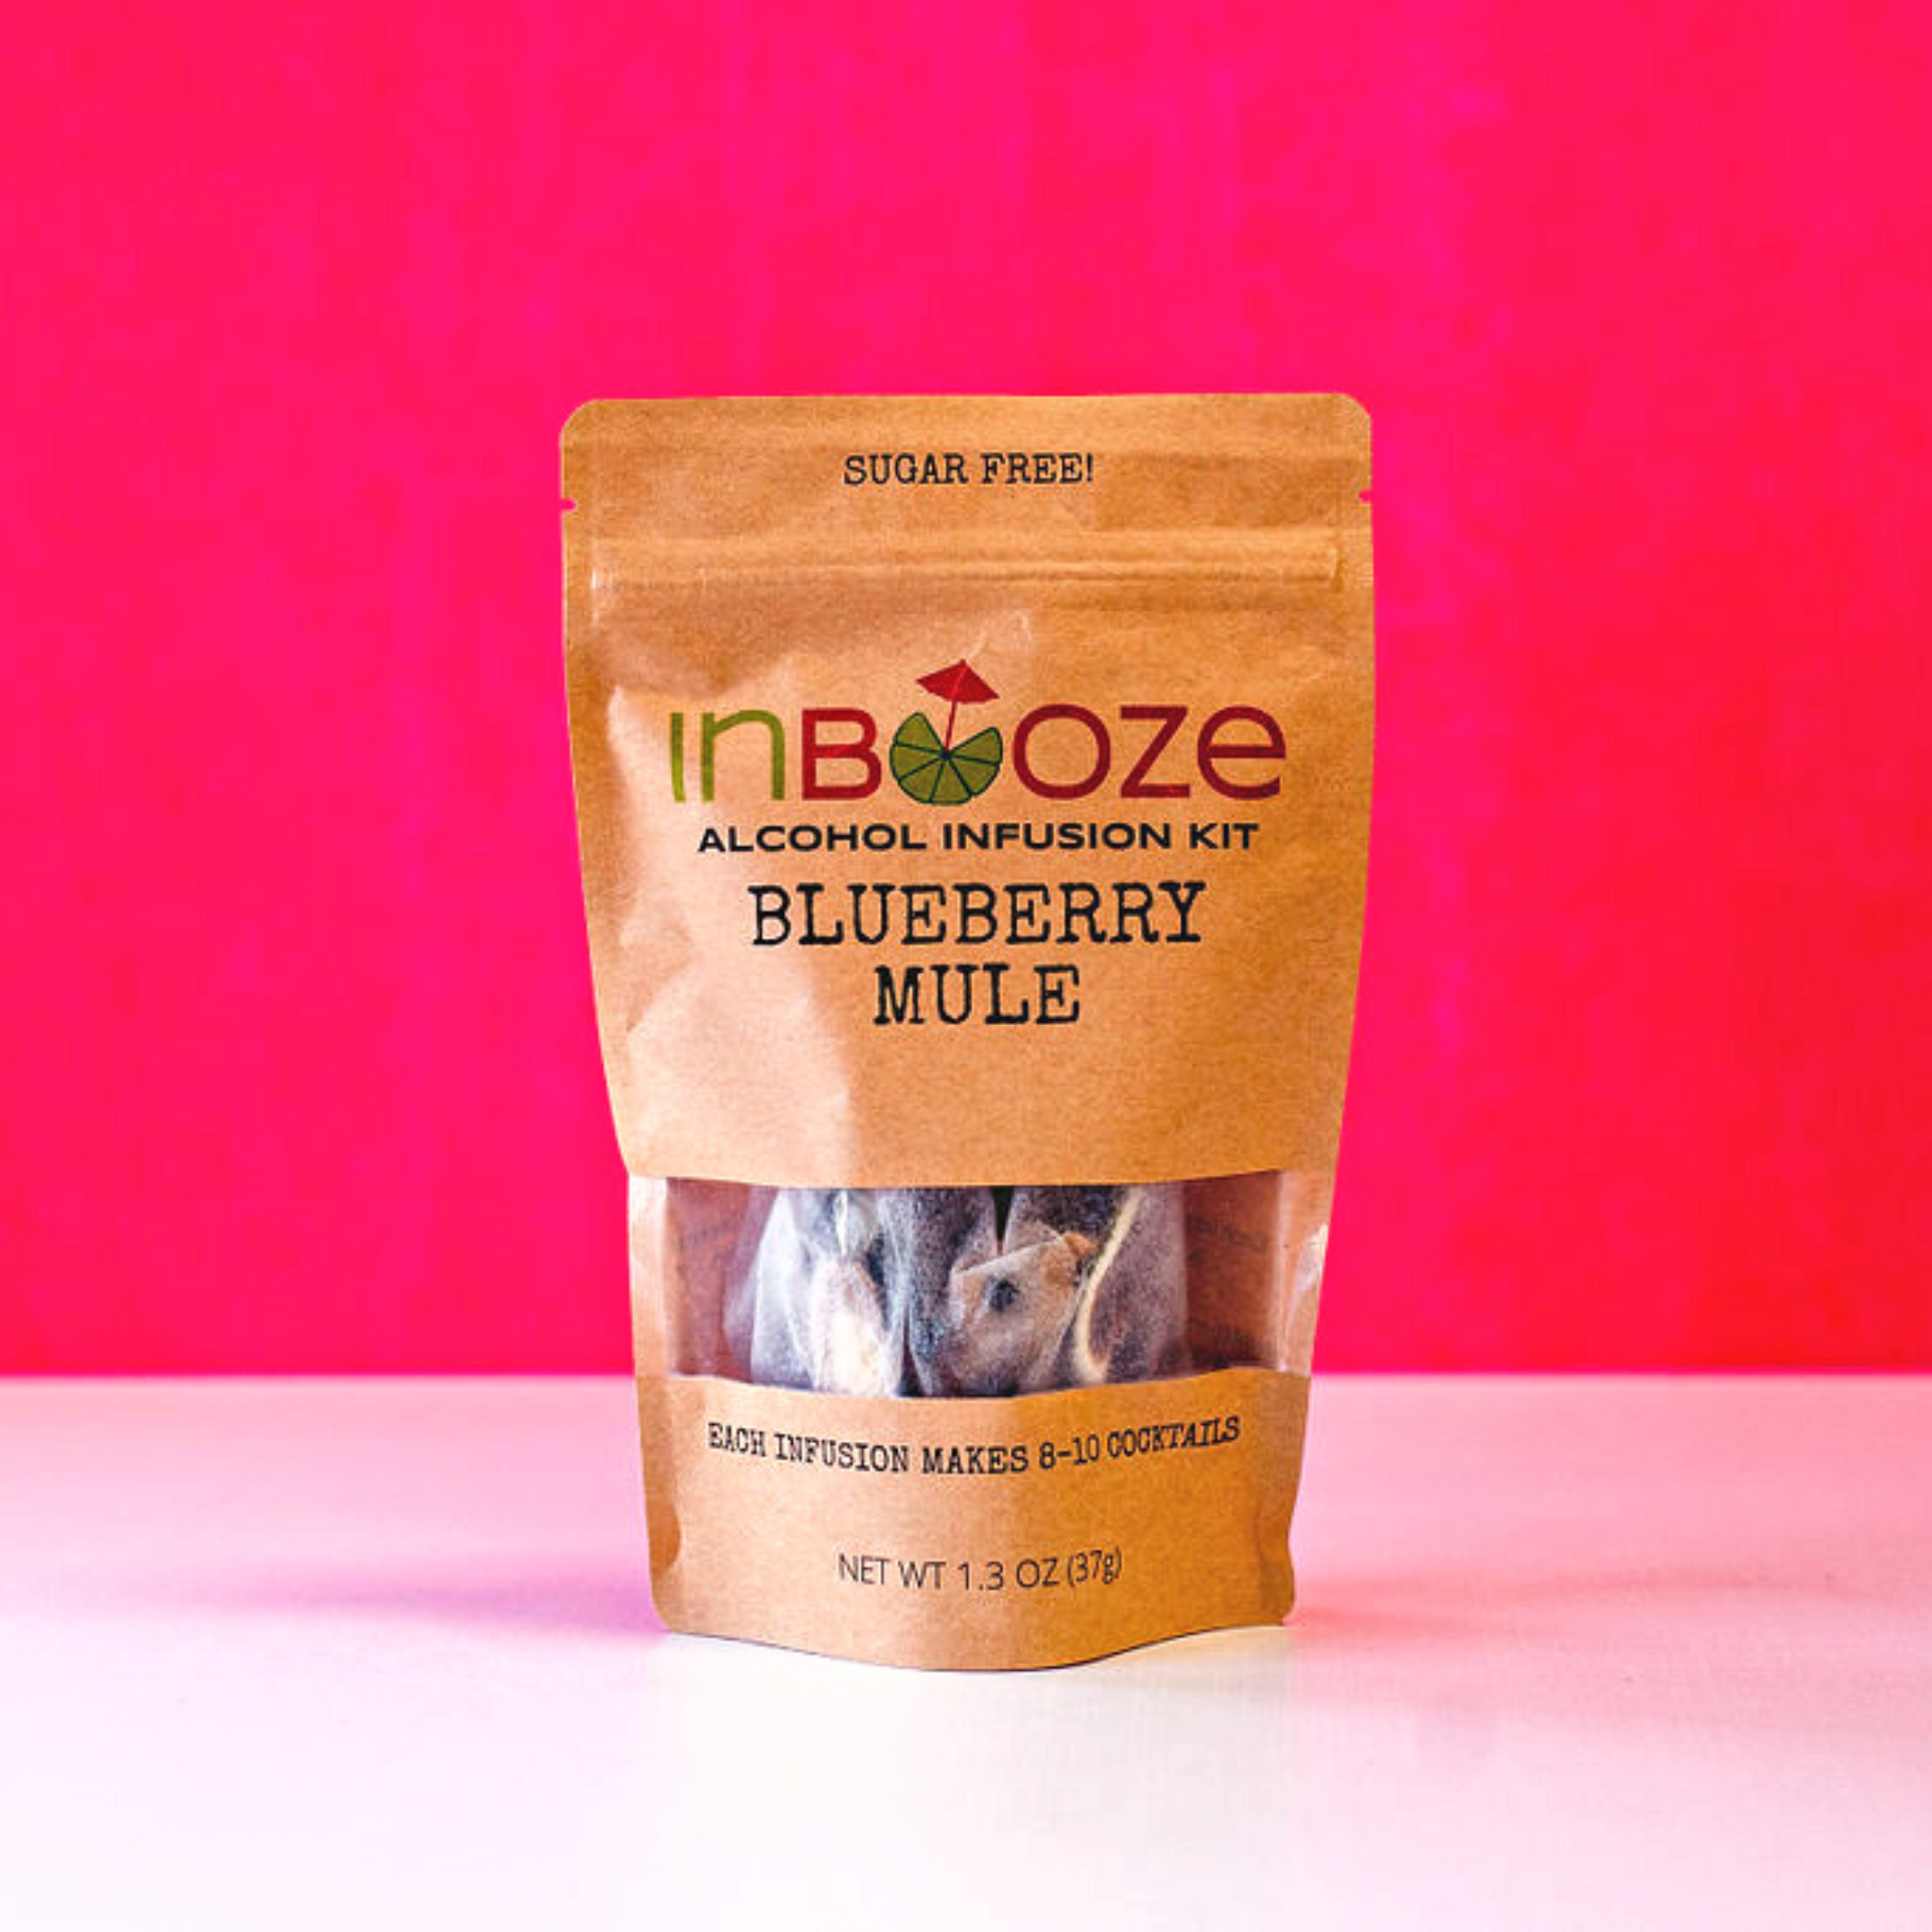 Blueberry Mule Infusion Kit - A sweet blueberry Moscow Mule!